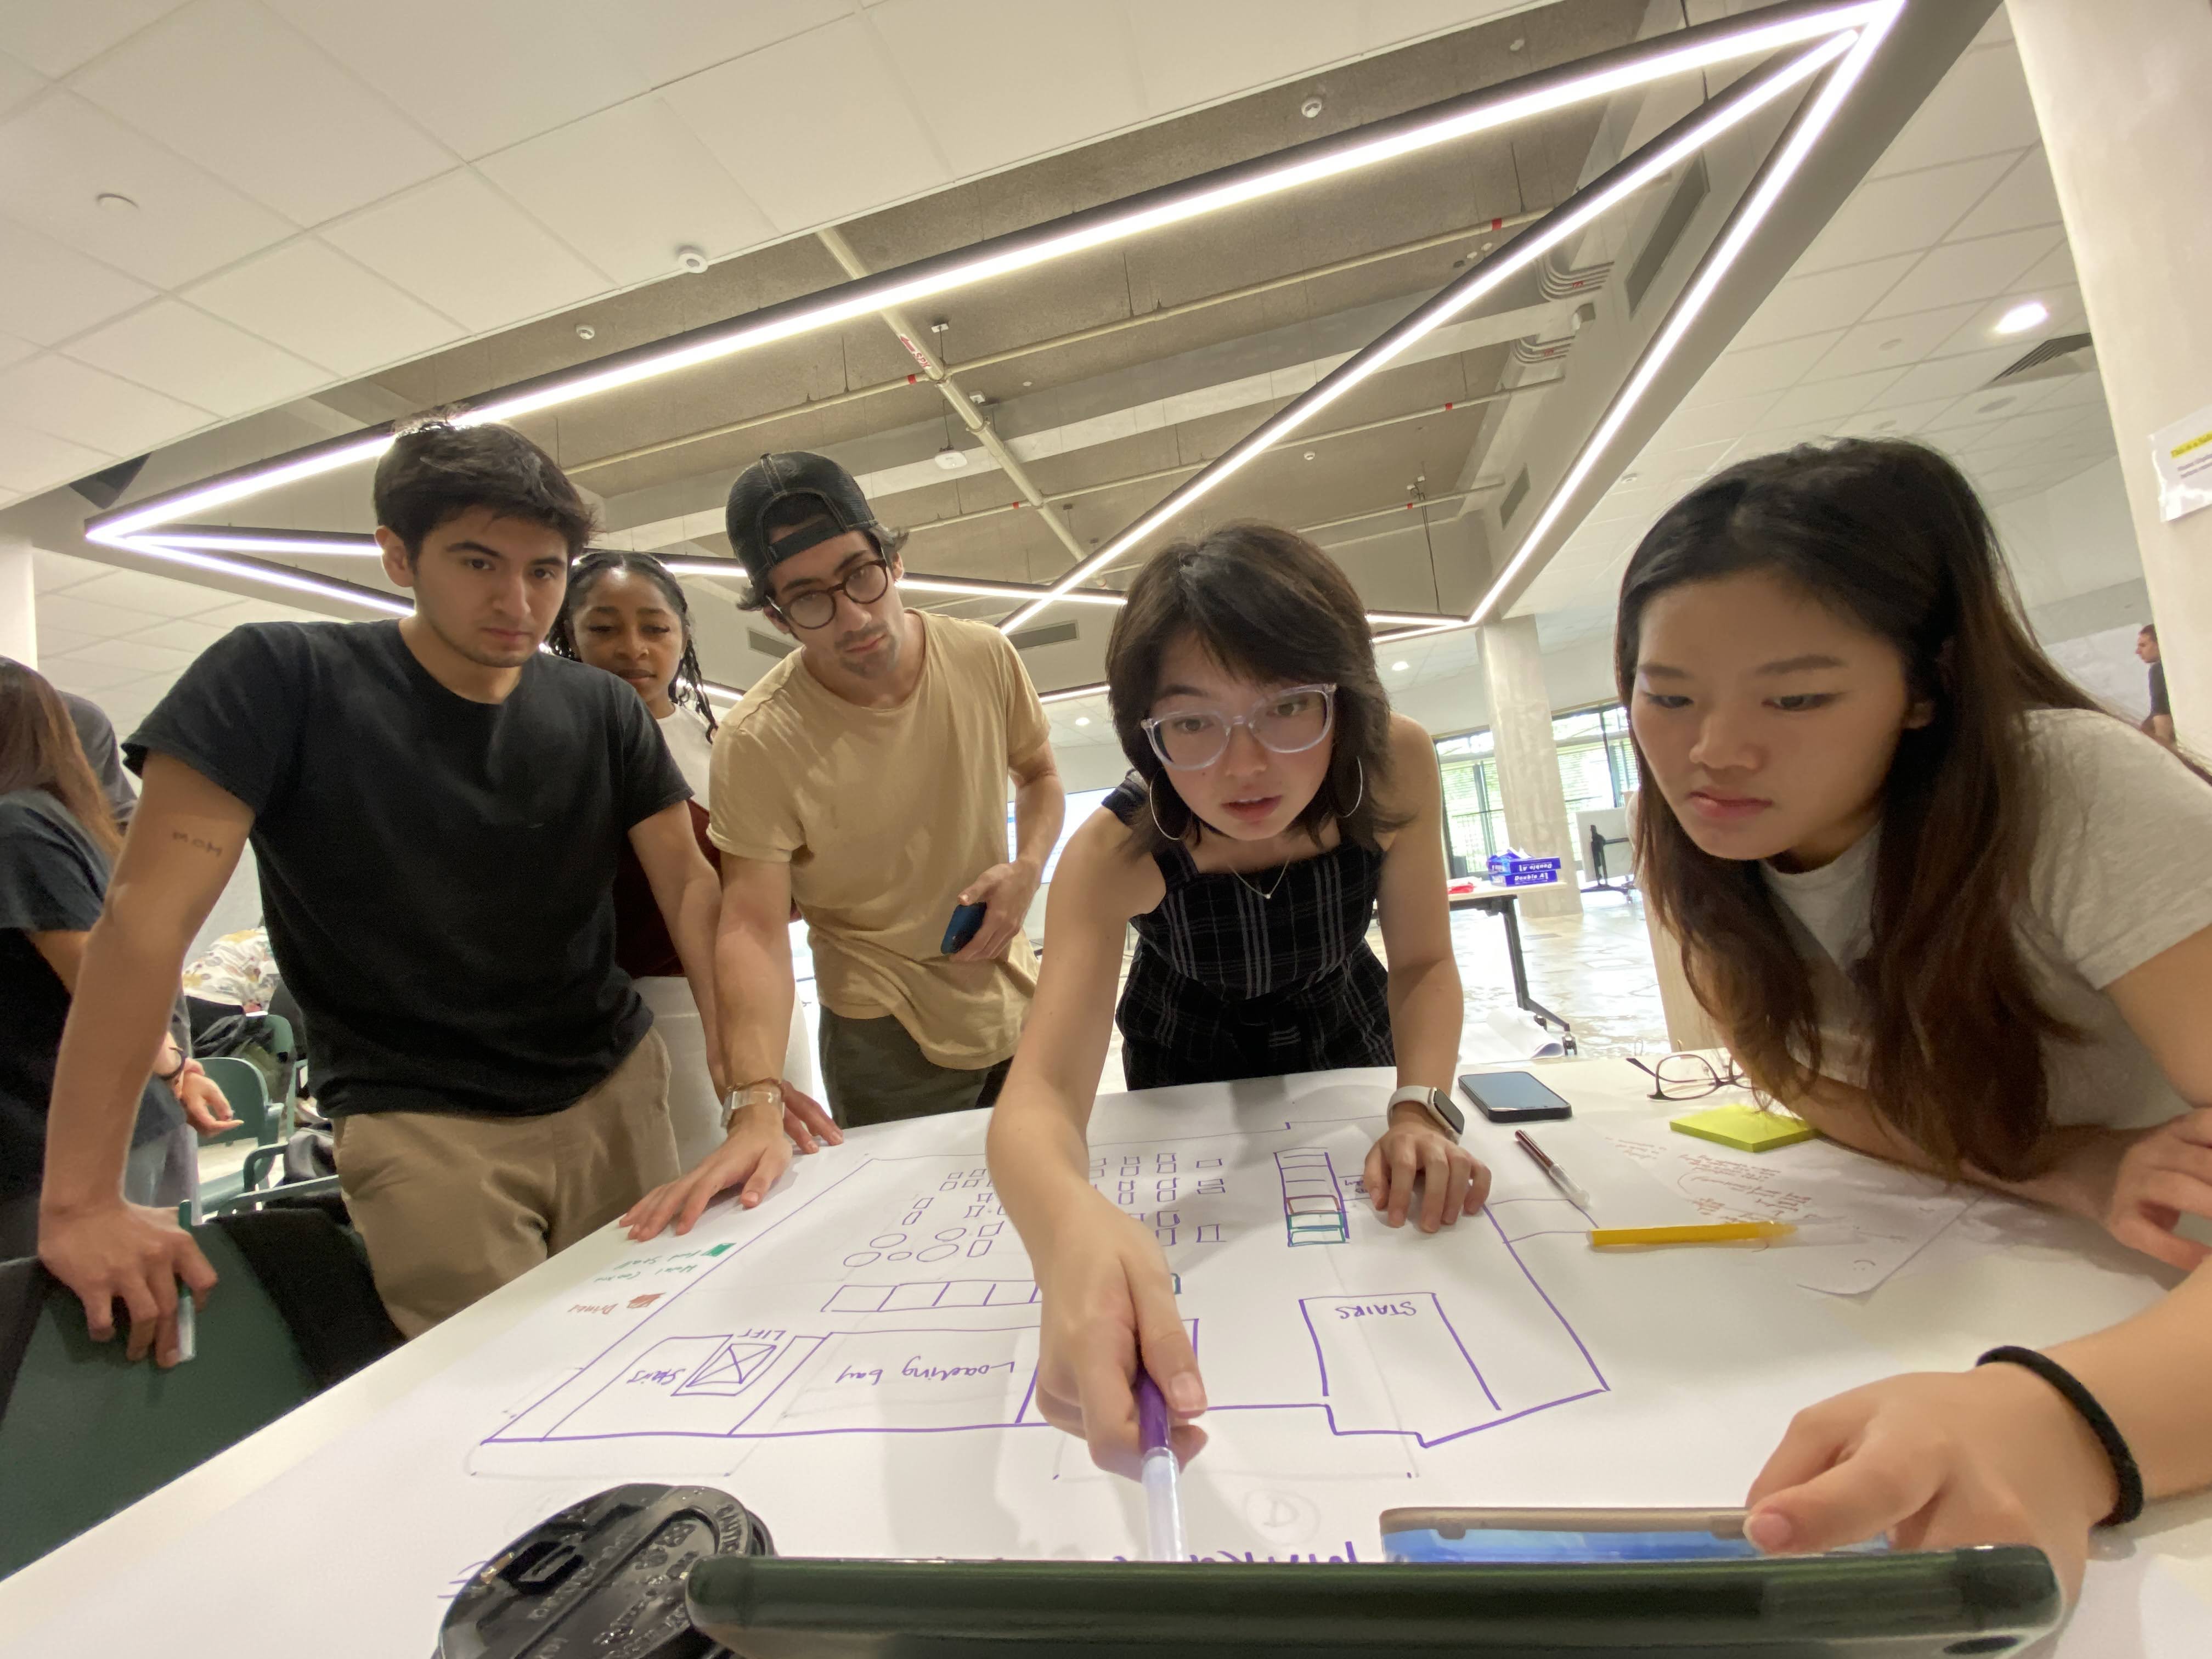 A group of four students examine a blueprint.